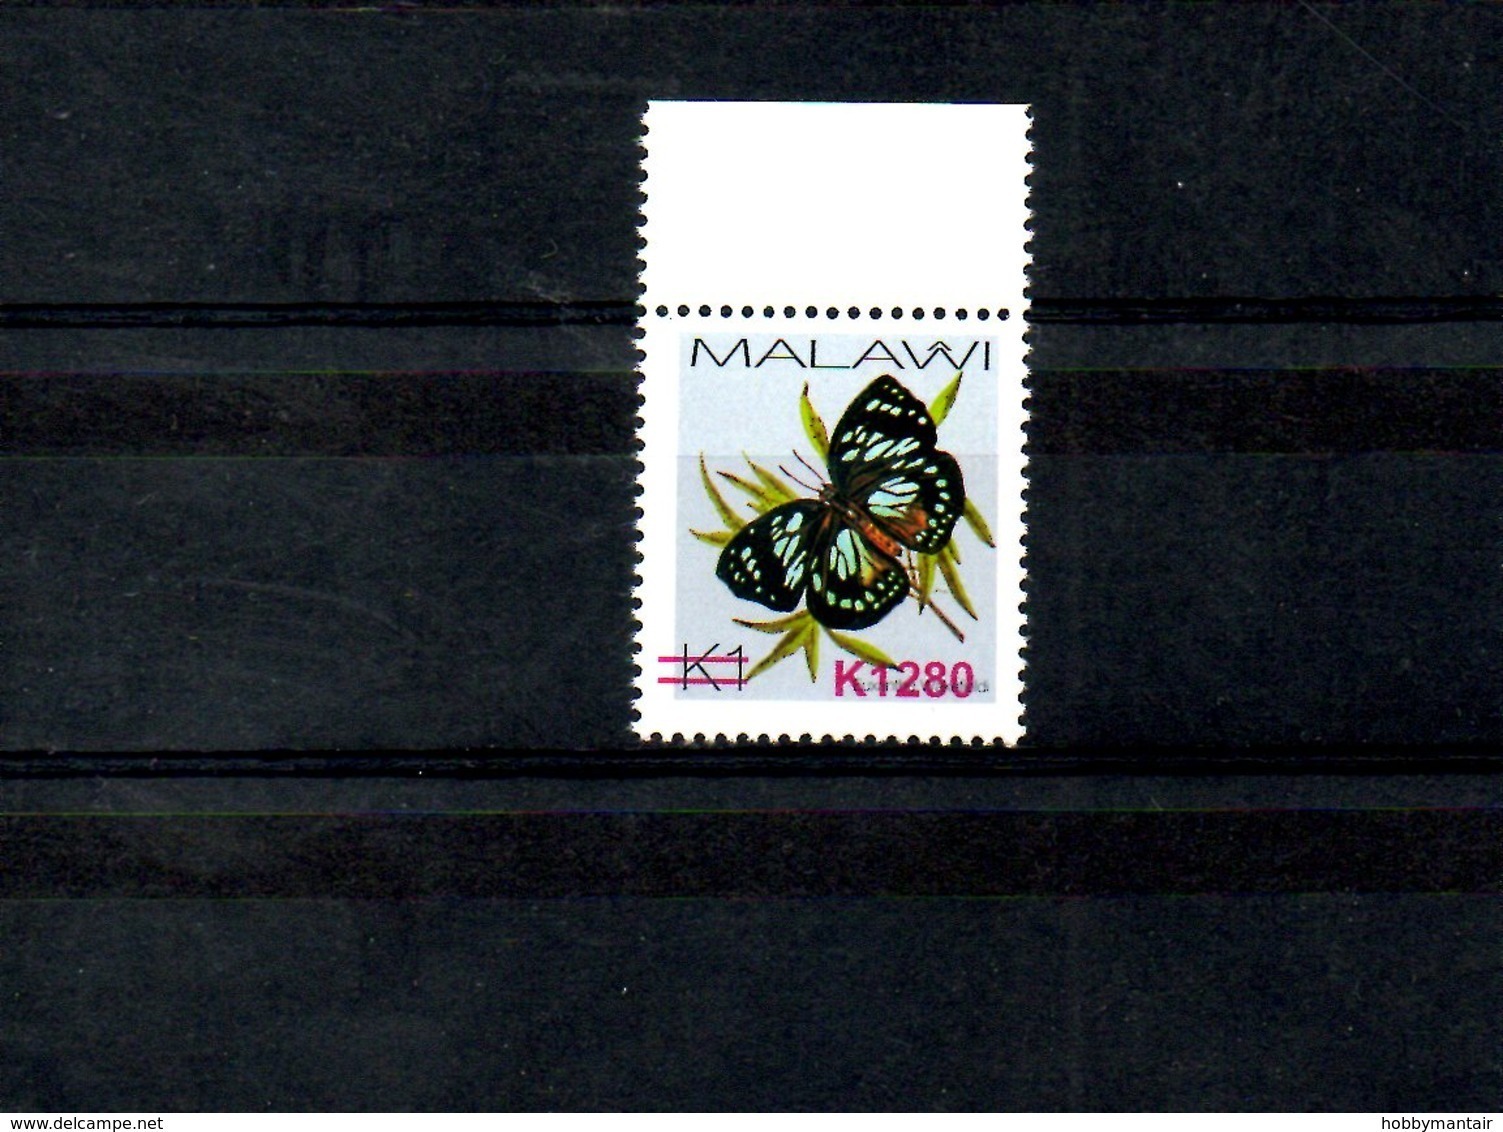 MALAWI, 2018, BUTTERFLY, O/P In Red, NEW VALUE, "k1280" 1v. MNH** NEW! - Butterflies